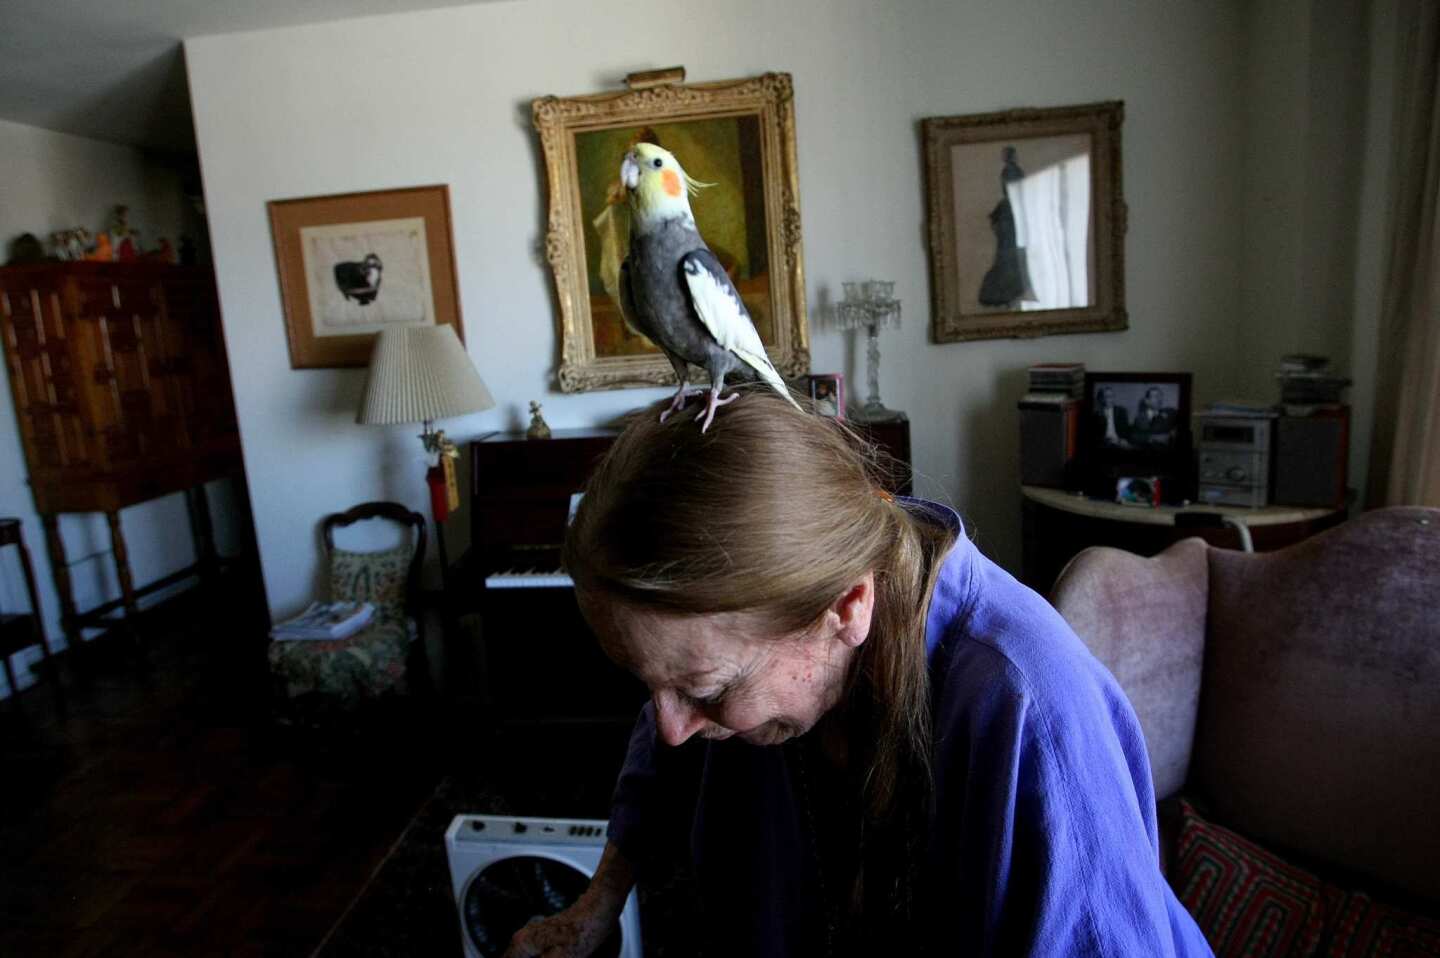 Patricia Morison, 97, with cockatiel Cookie, has lived at Park La Brea for more than 50 years. Back when, "It was more homogenous.... Most of the population was actors, actresses, artistic folks and businesspeople," she says. "There were never any children." About its evolution over the decades, she's philosophical: "Life goes, life changes."